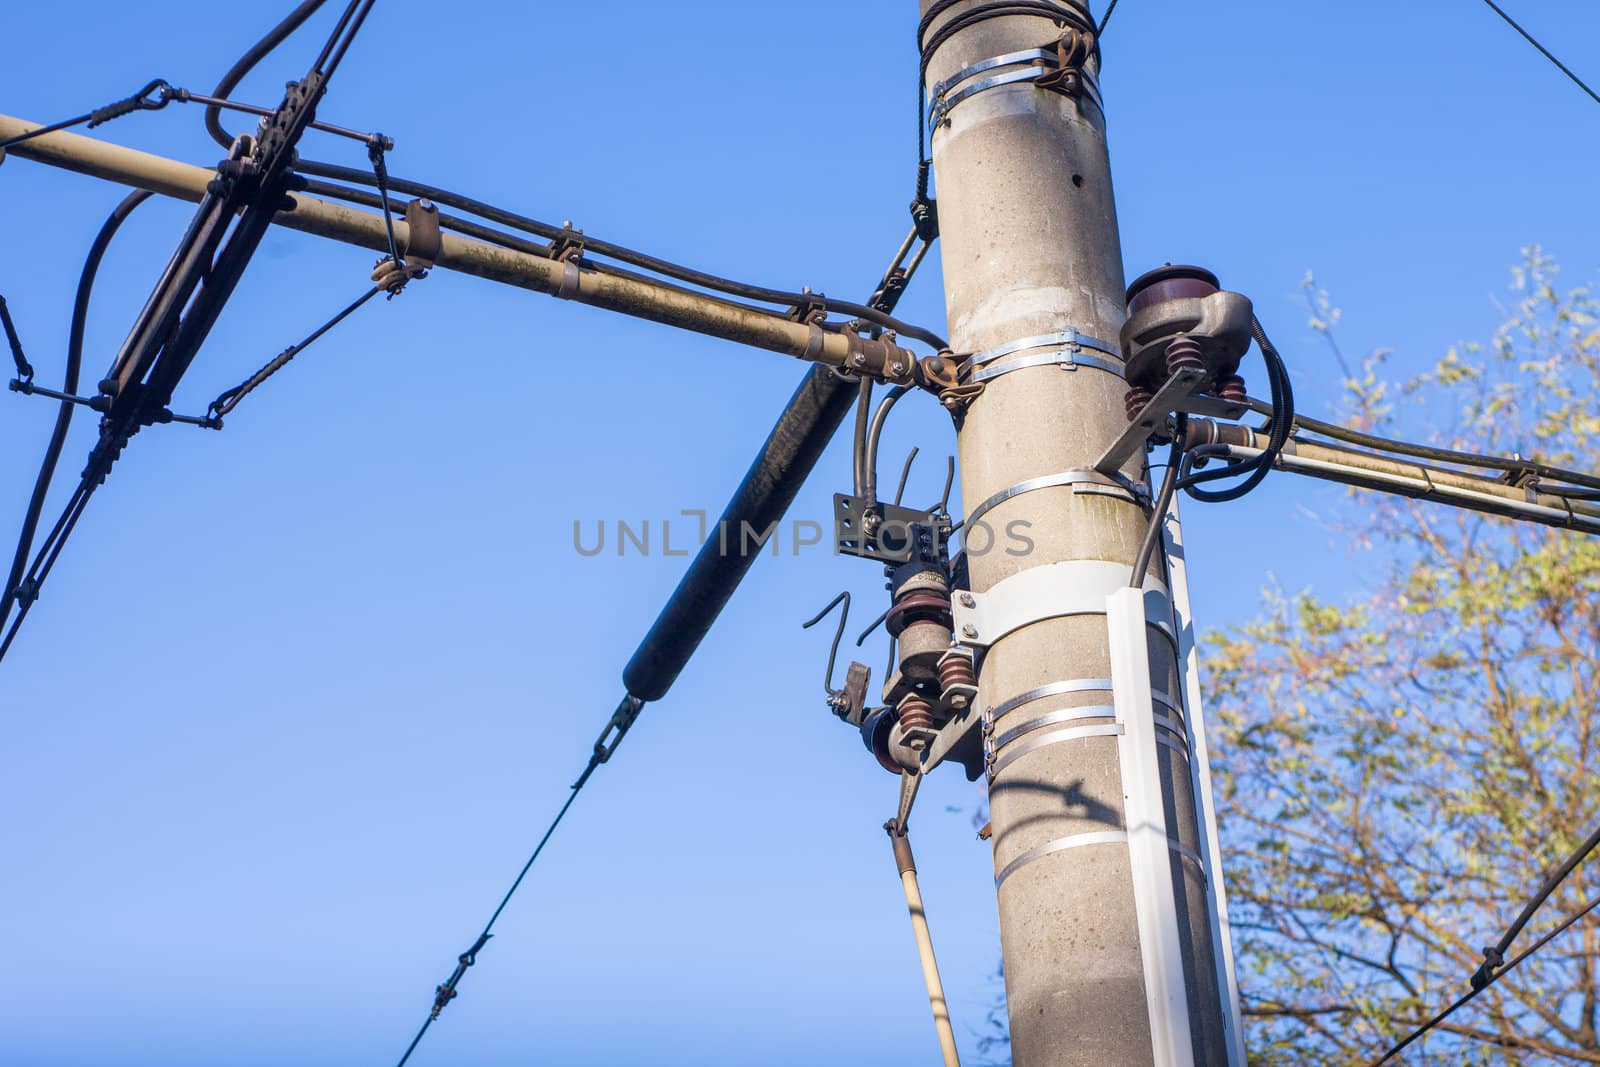 Overhead electrical power cables by edan